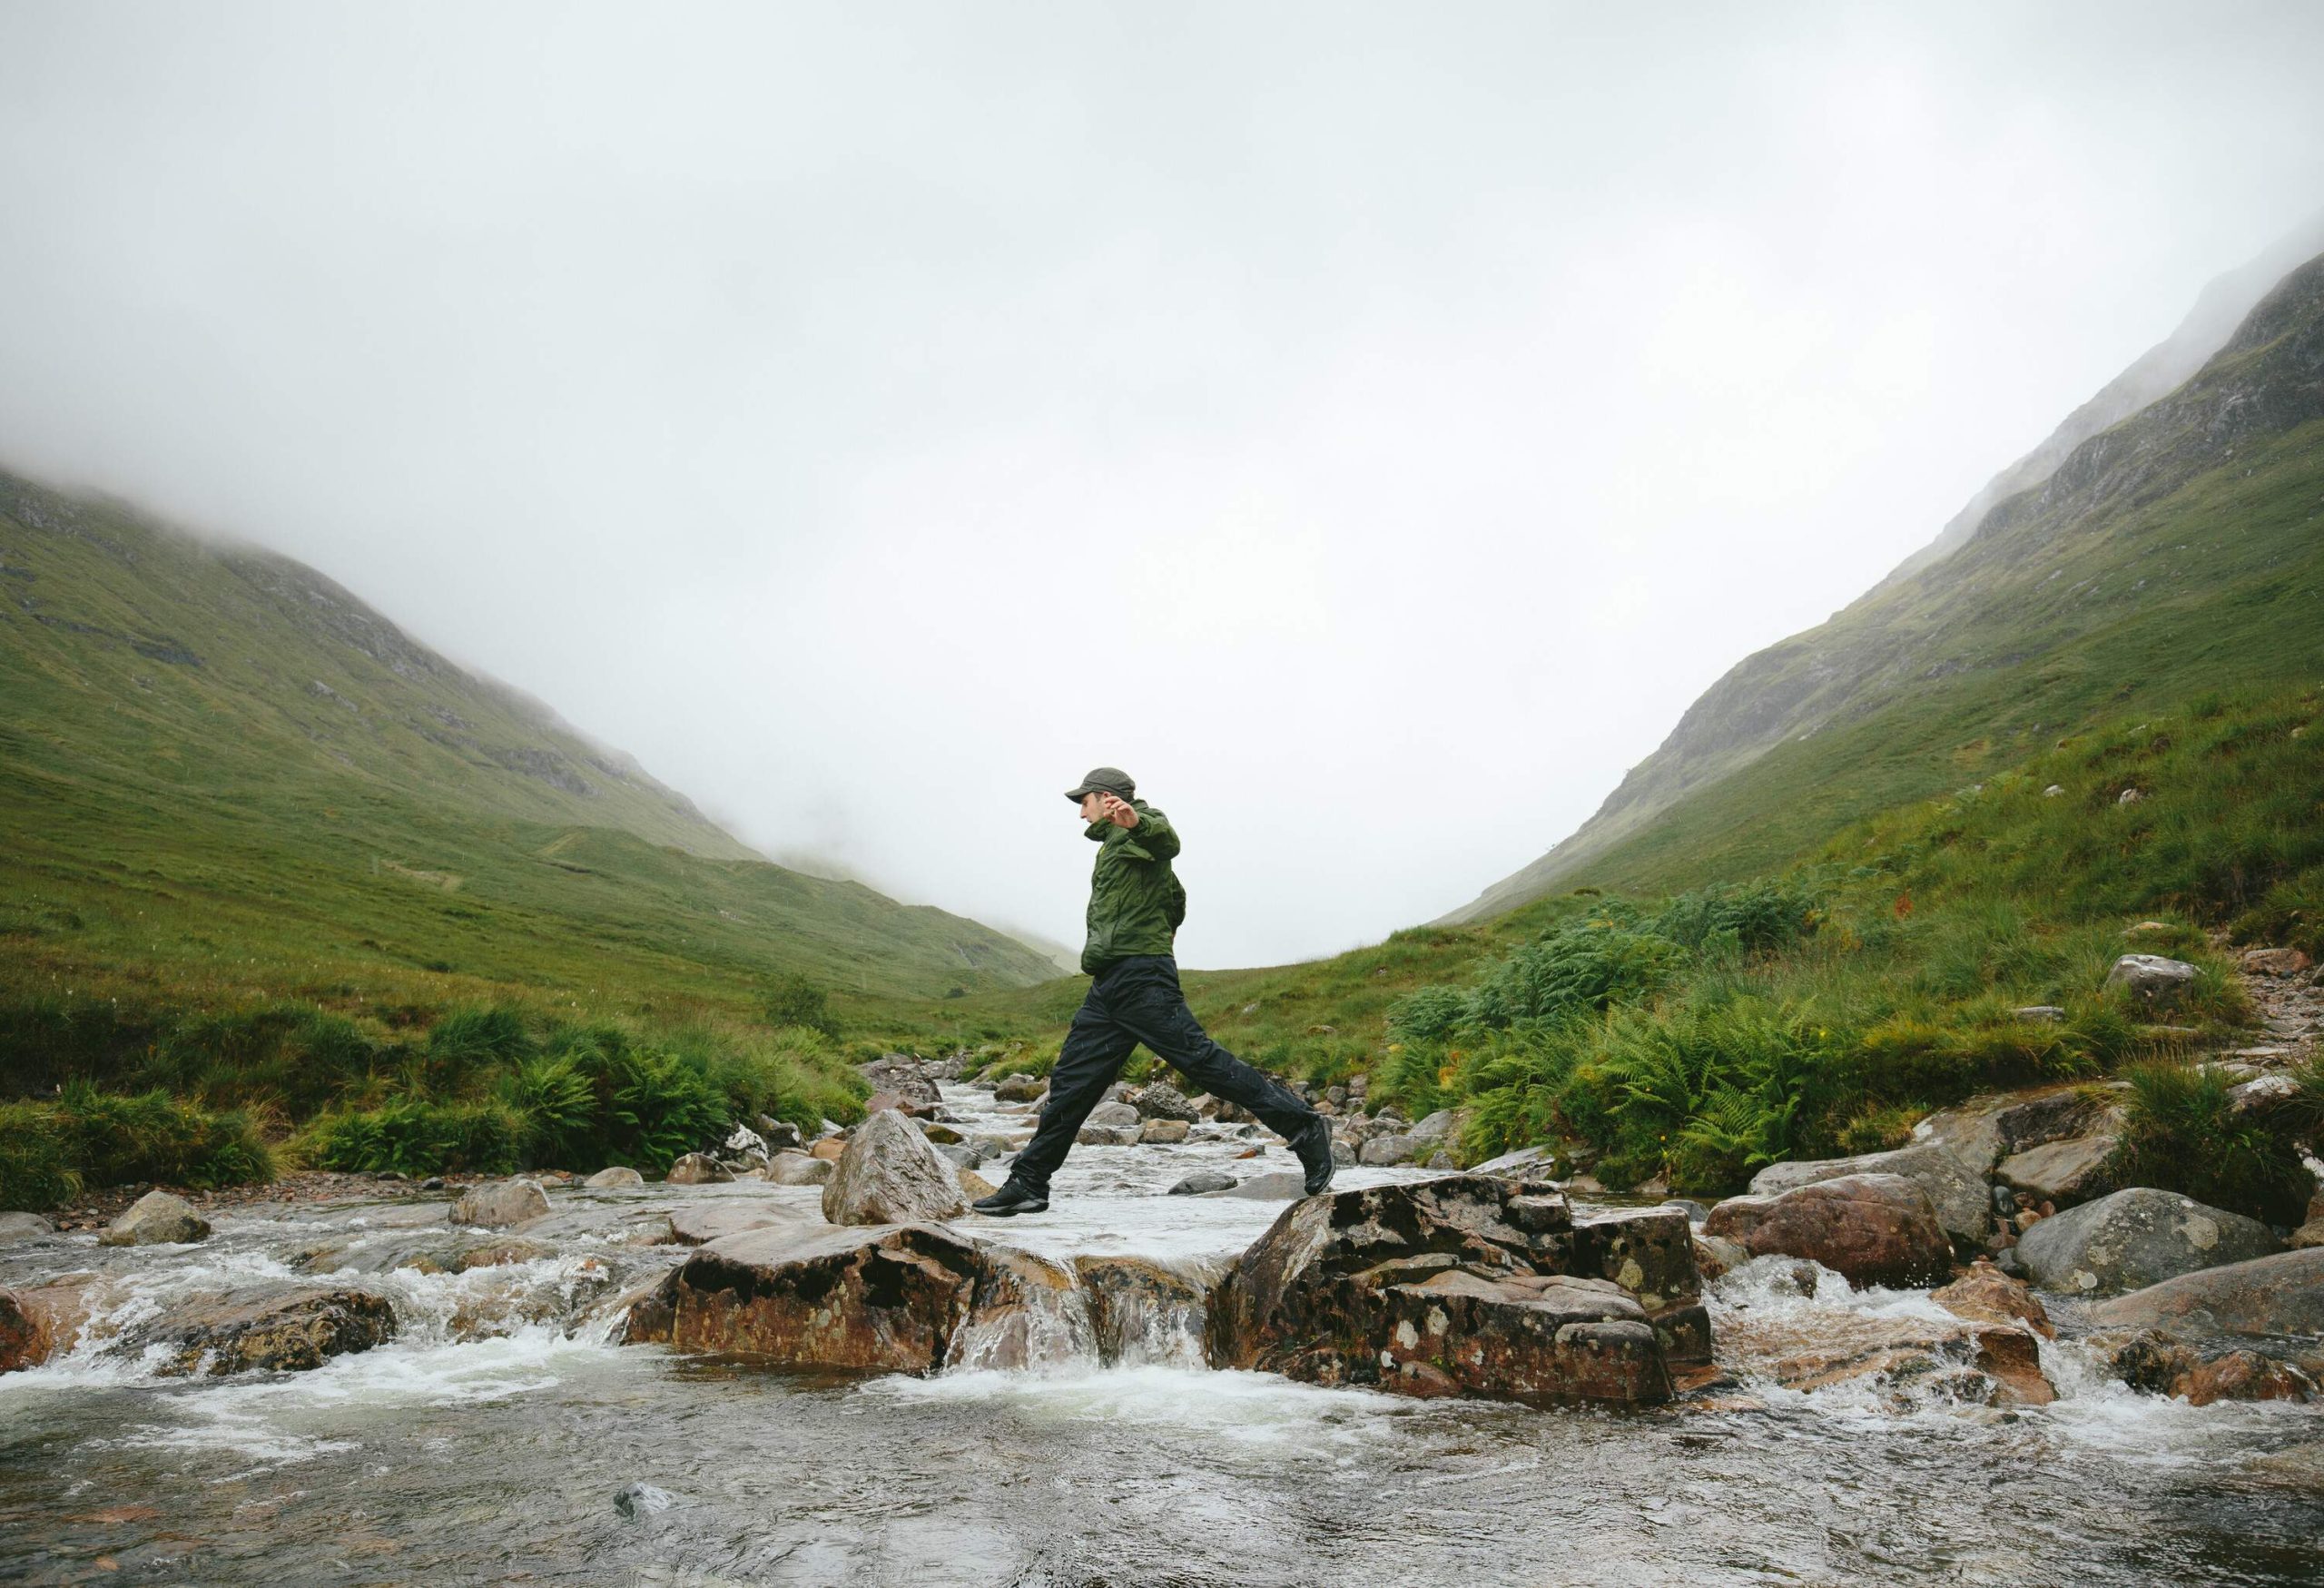 A man skillfully balances on the rocks within a gushing river, surrounded by the awe-inspiring beauty of lush mountains.